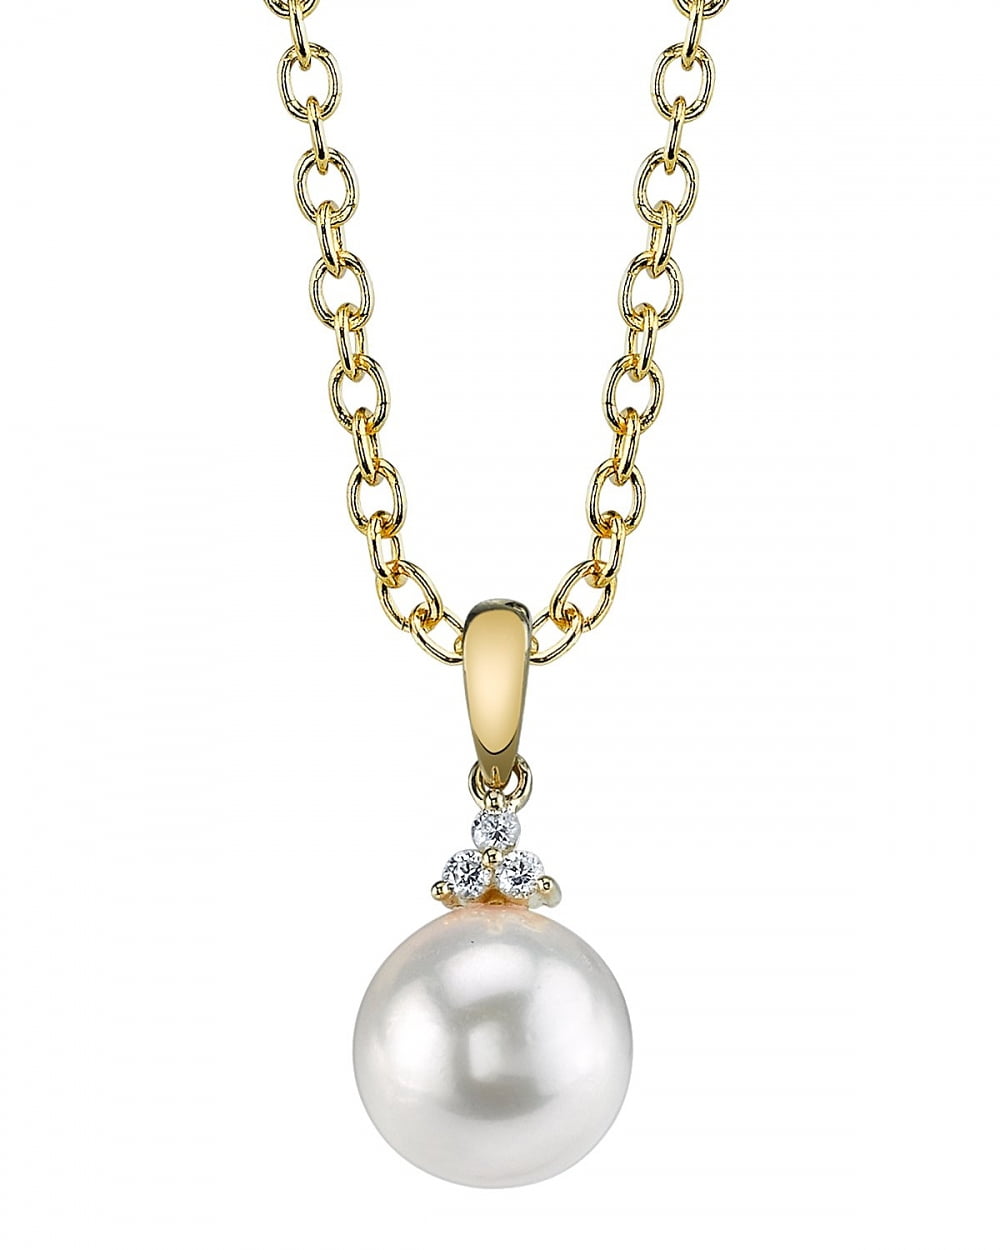 9-10mm Natural White South Sea Pearl Pendant AAA Jewelry Gift Chain Fashion 